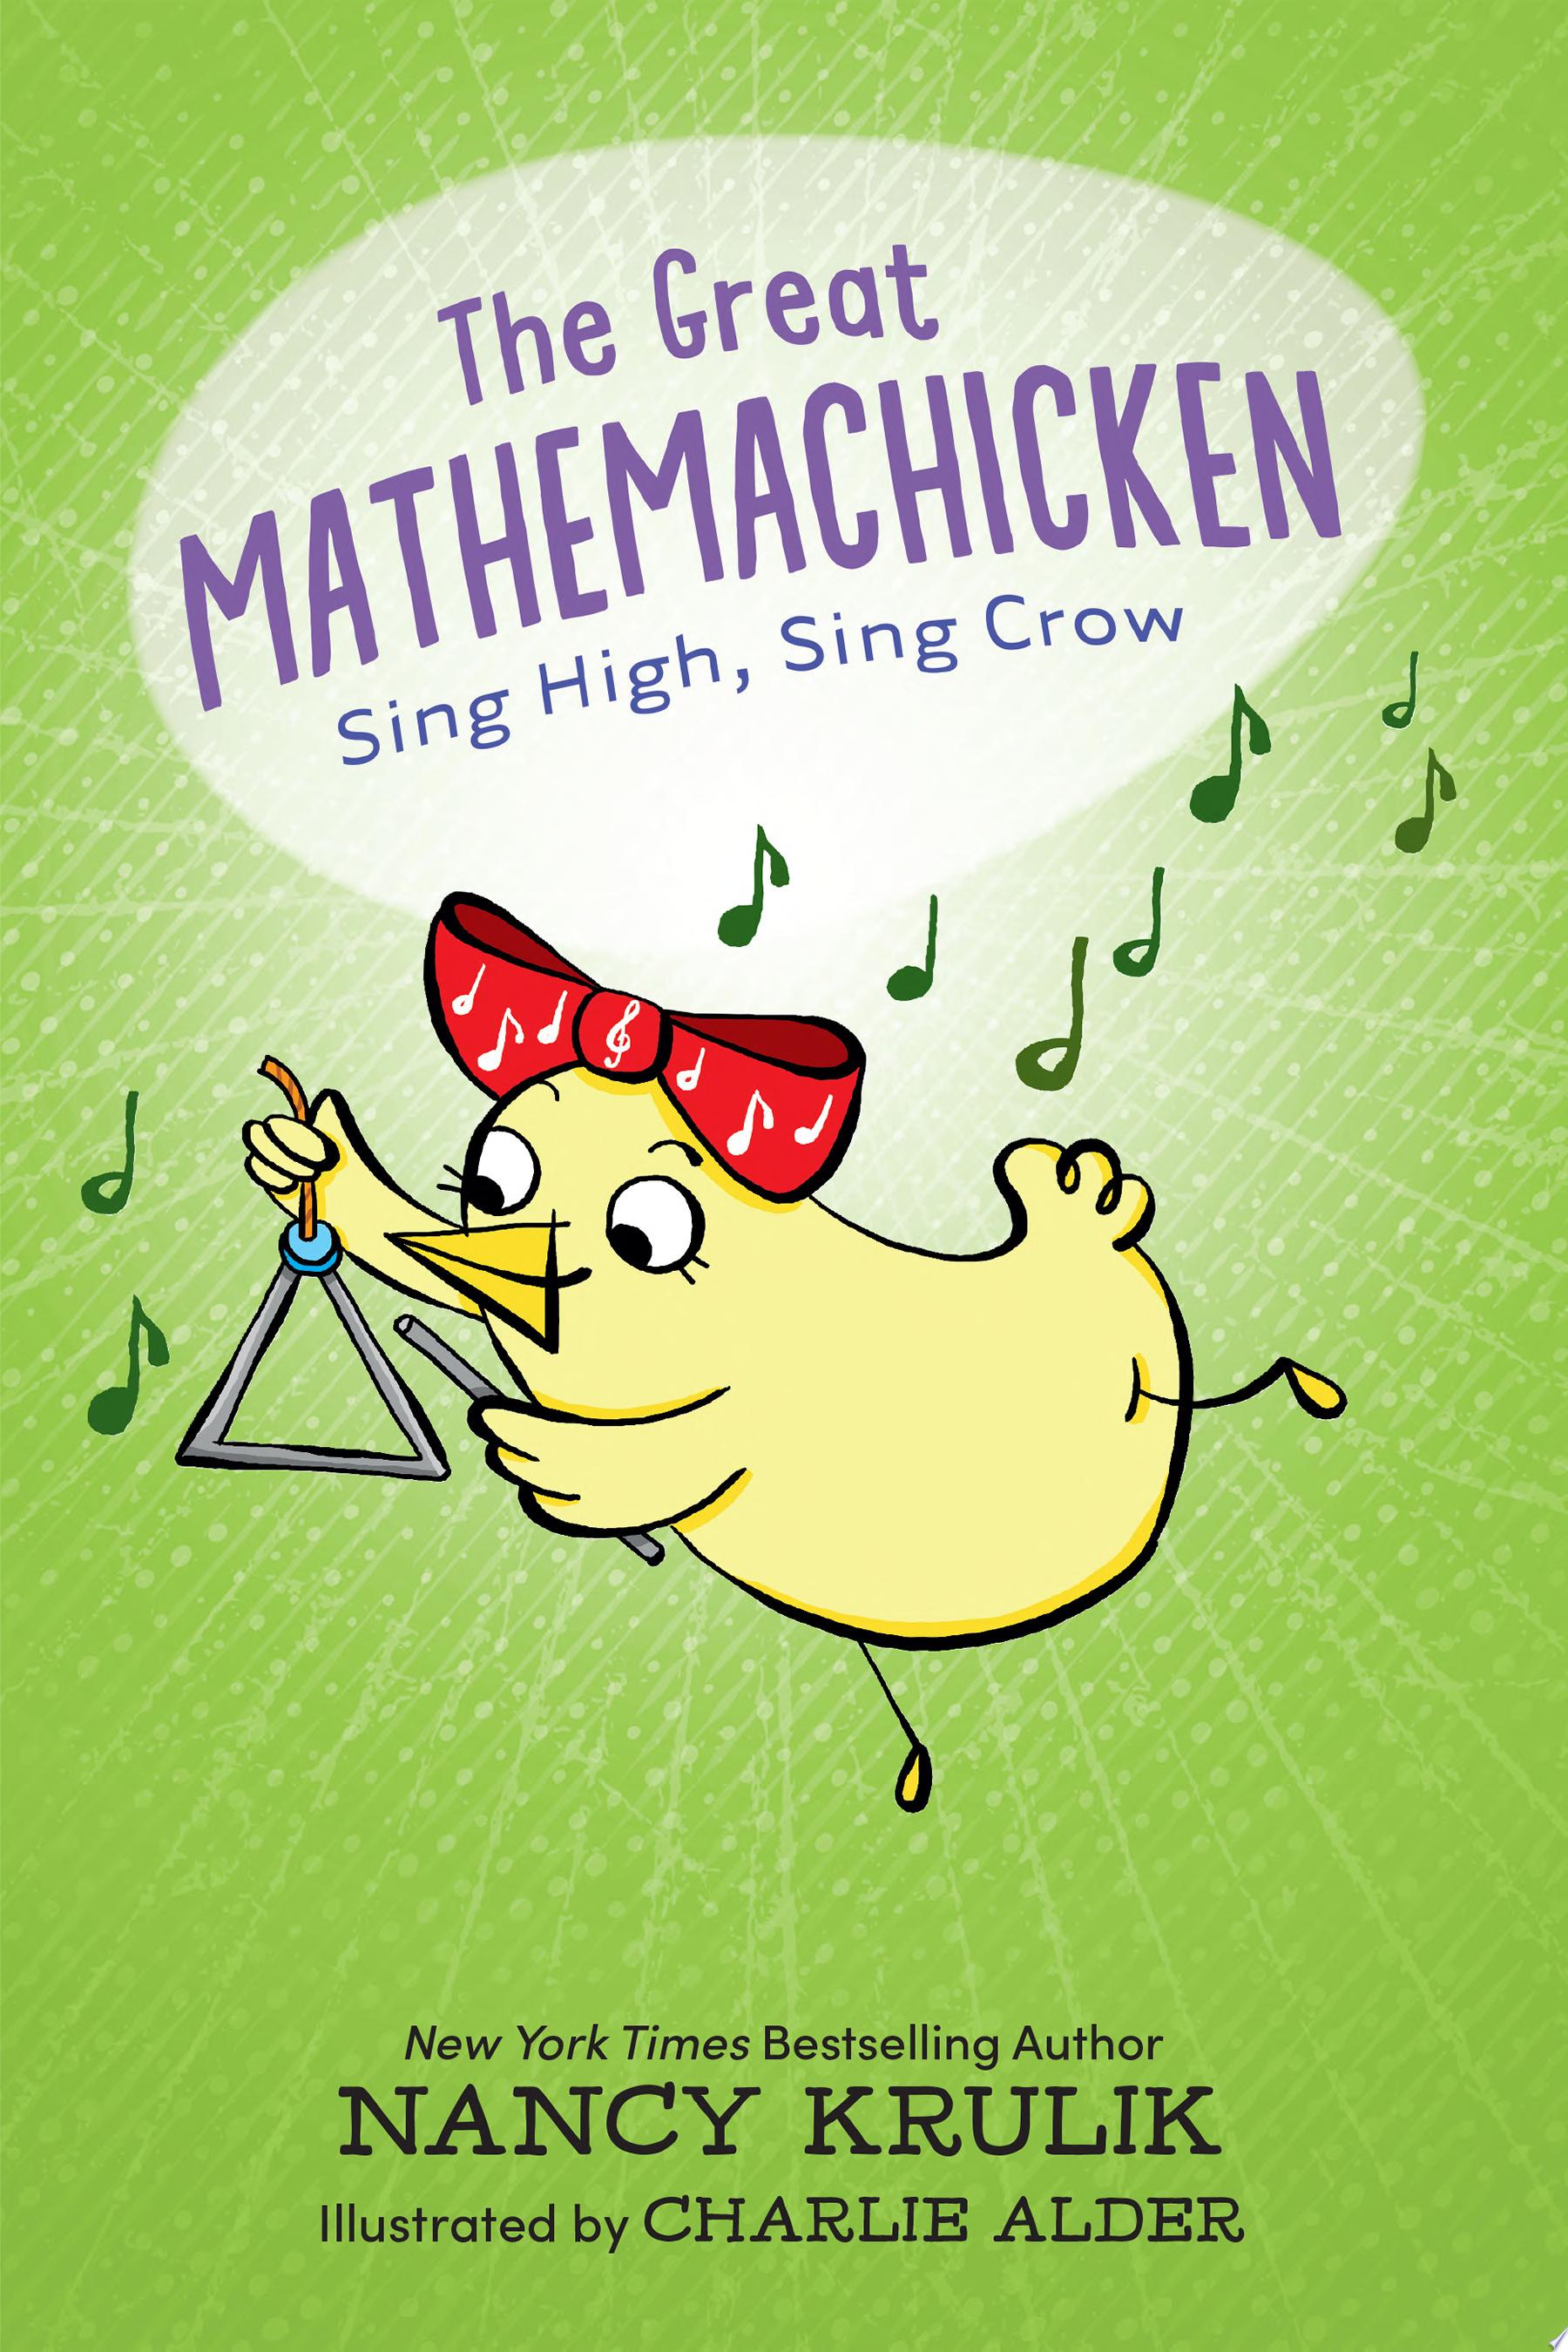 Image for "The Great Mathemachicken 3: Sing High, Sing Crow"